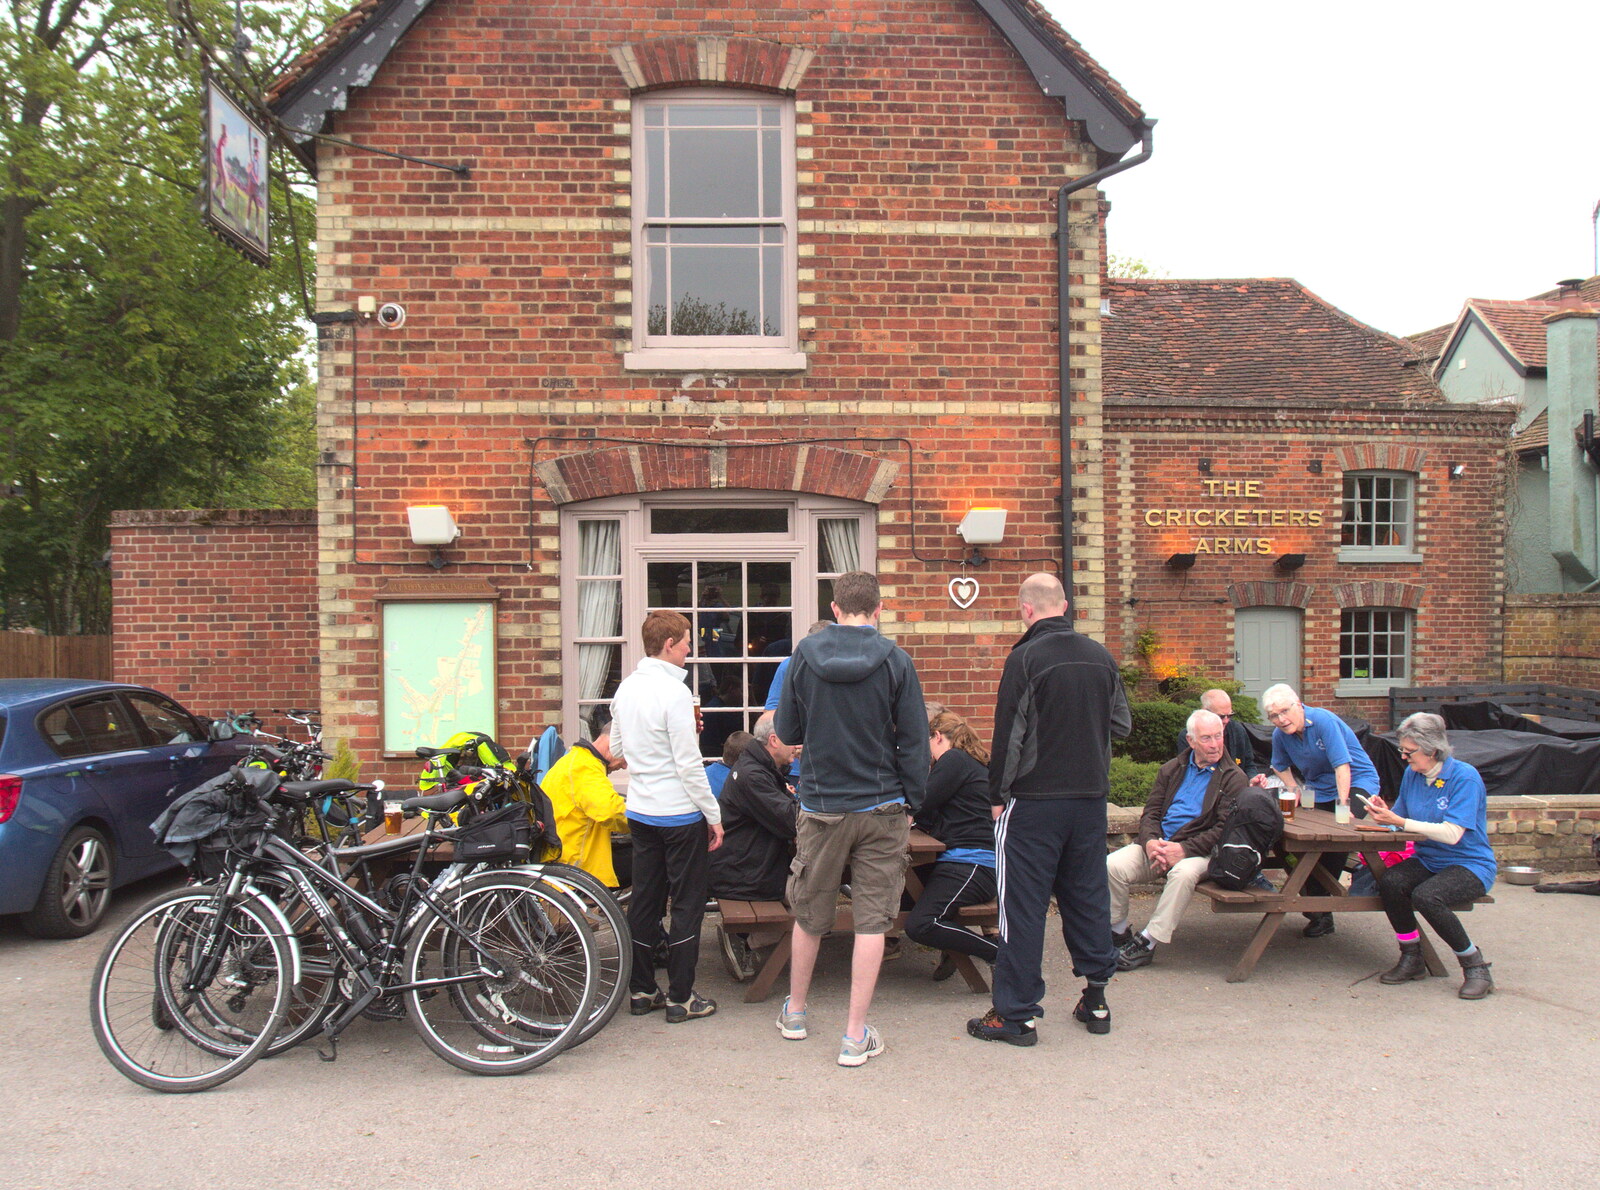 The Cricketer's Arms at Rickling Green from The Last-Ever BSCC Weekend Away Bike Ride, Thaxted, Essex - 6th May 2017